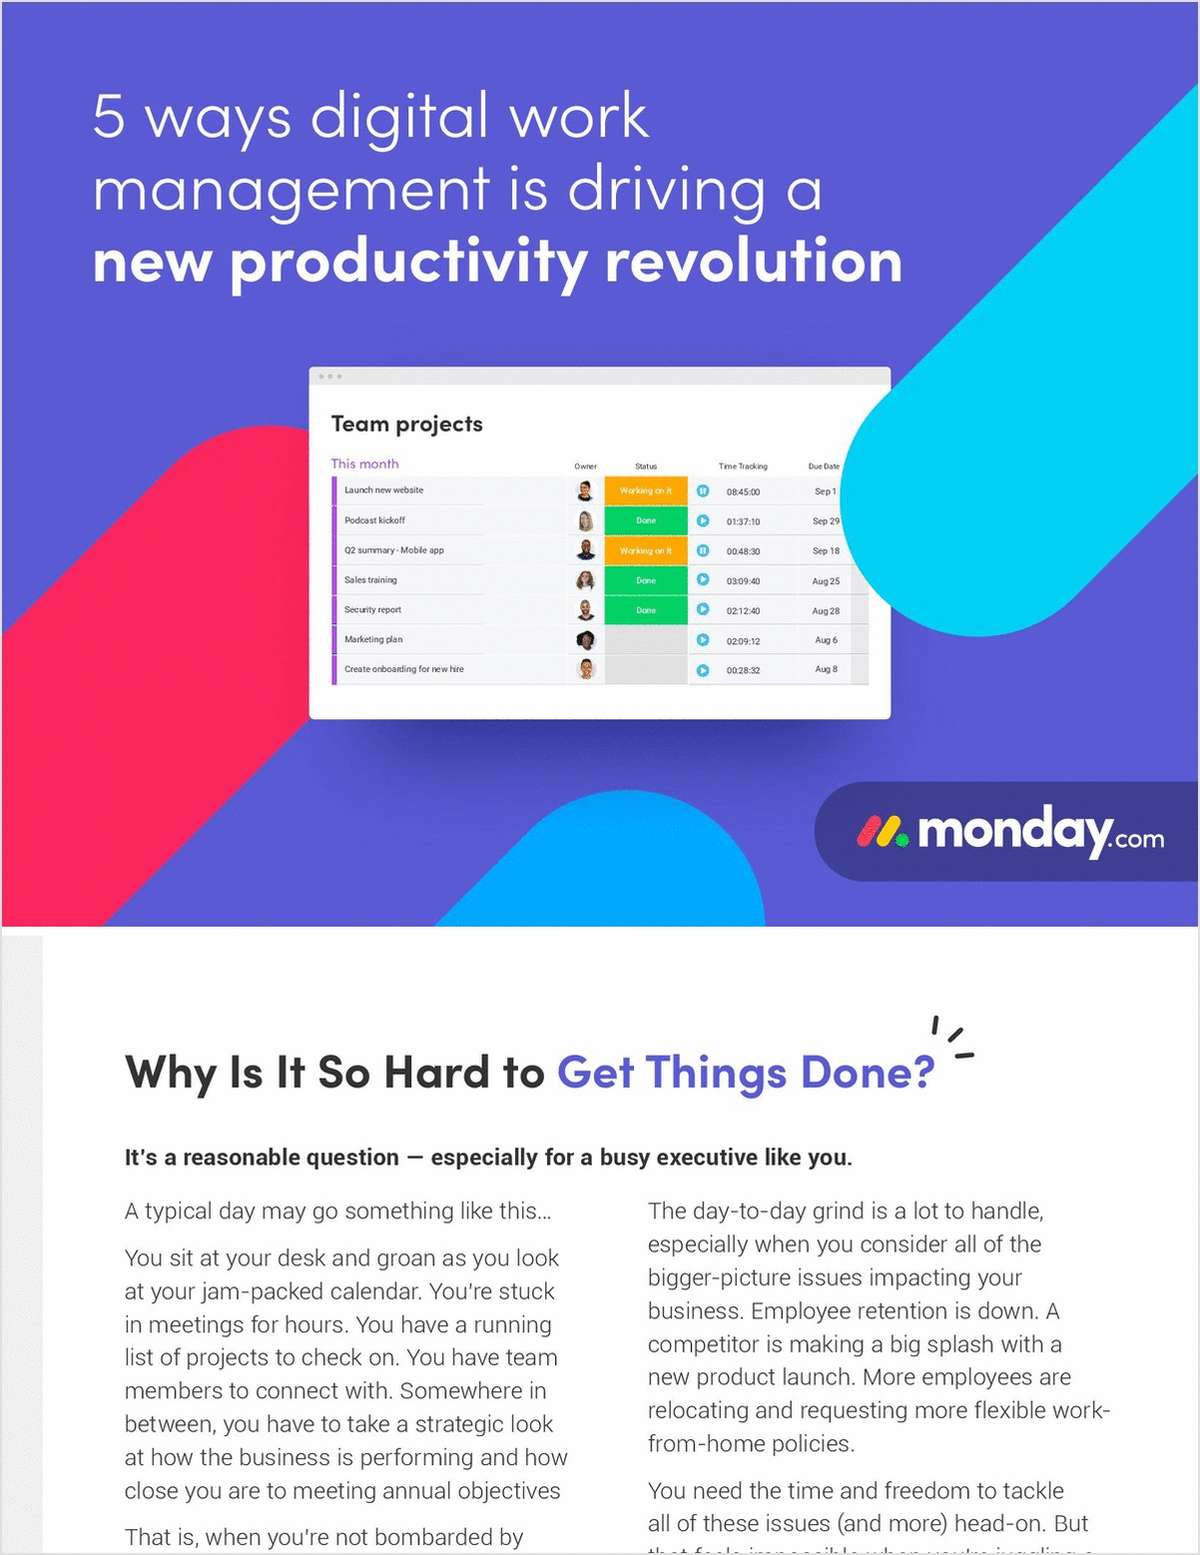 5 Ways Digital Work Management Is Driving A New Productivity Revolution